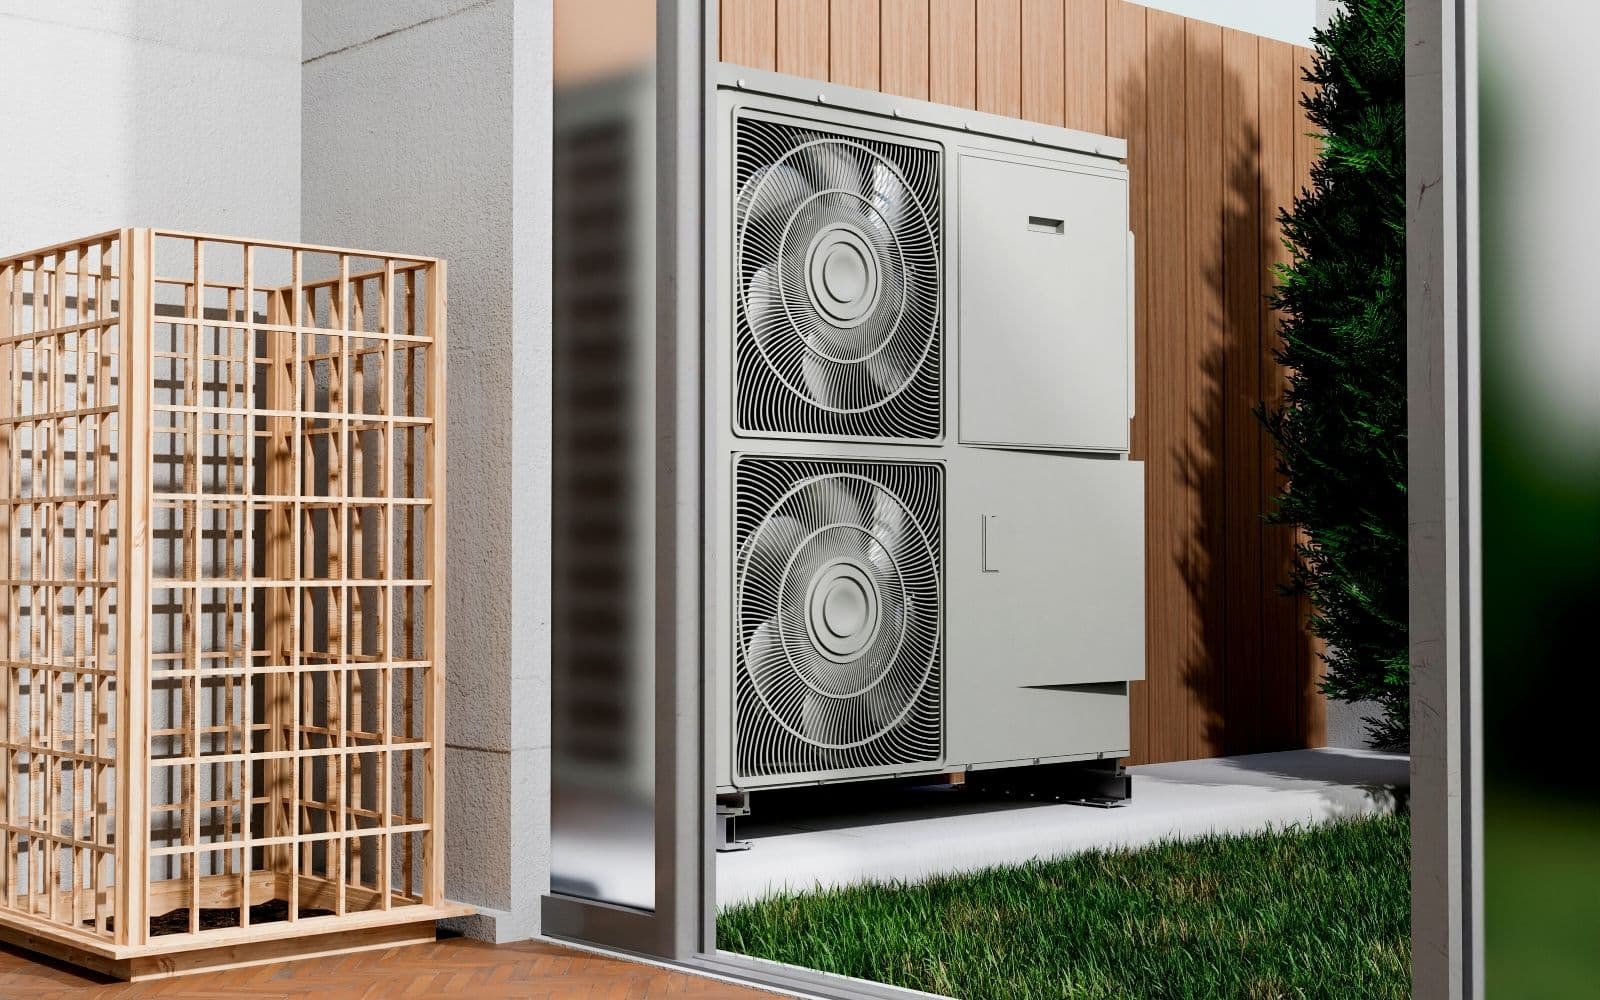 Is my home suitable for a heat pump?